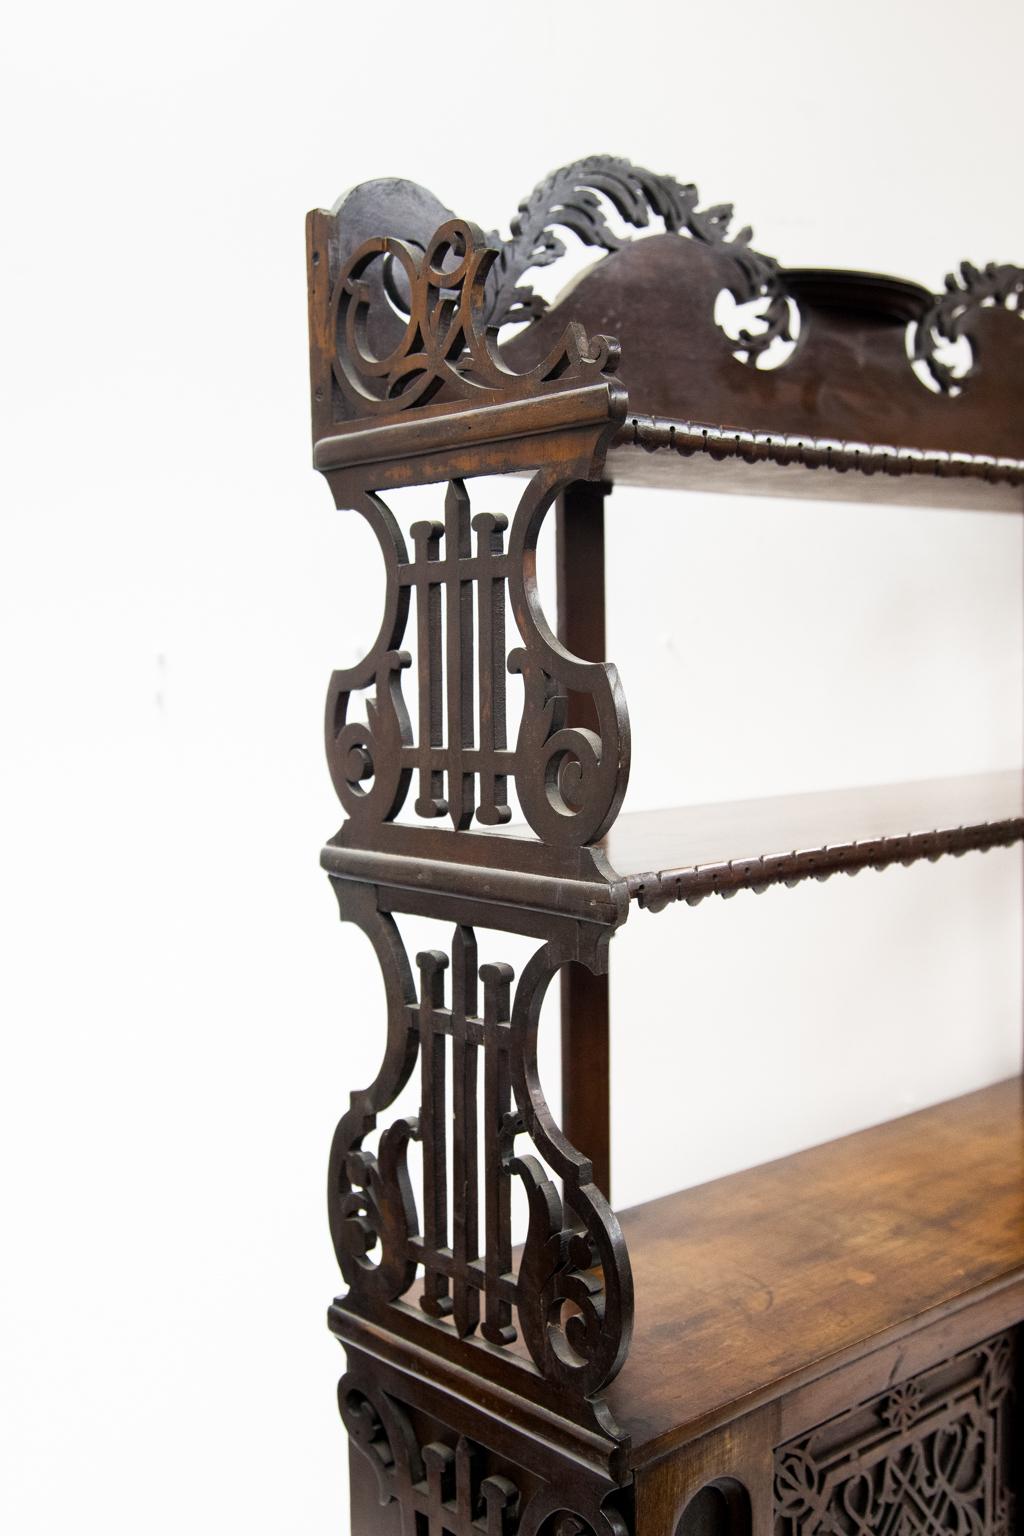 Mahogany open fretwork three-tiered shelf has sides of stylized lyre shape. The two doors with blind fretwork fold down. The middle shelf and top have applied carved moldings. The top crest has carved open work floral arabesques.